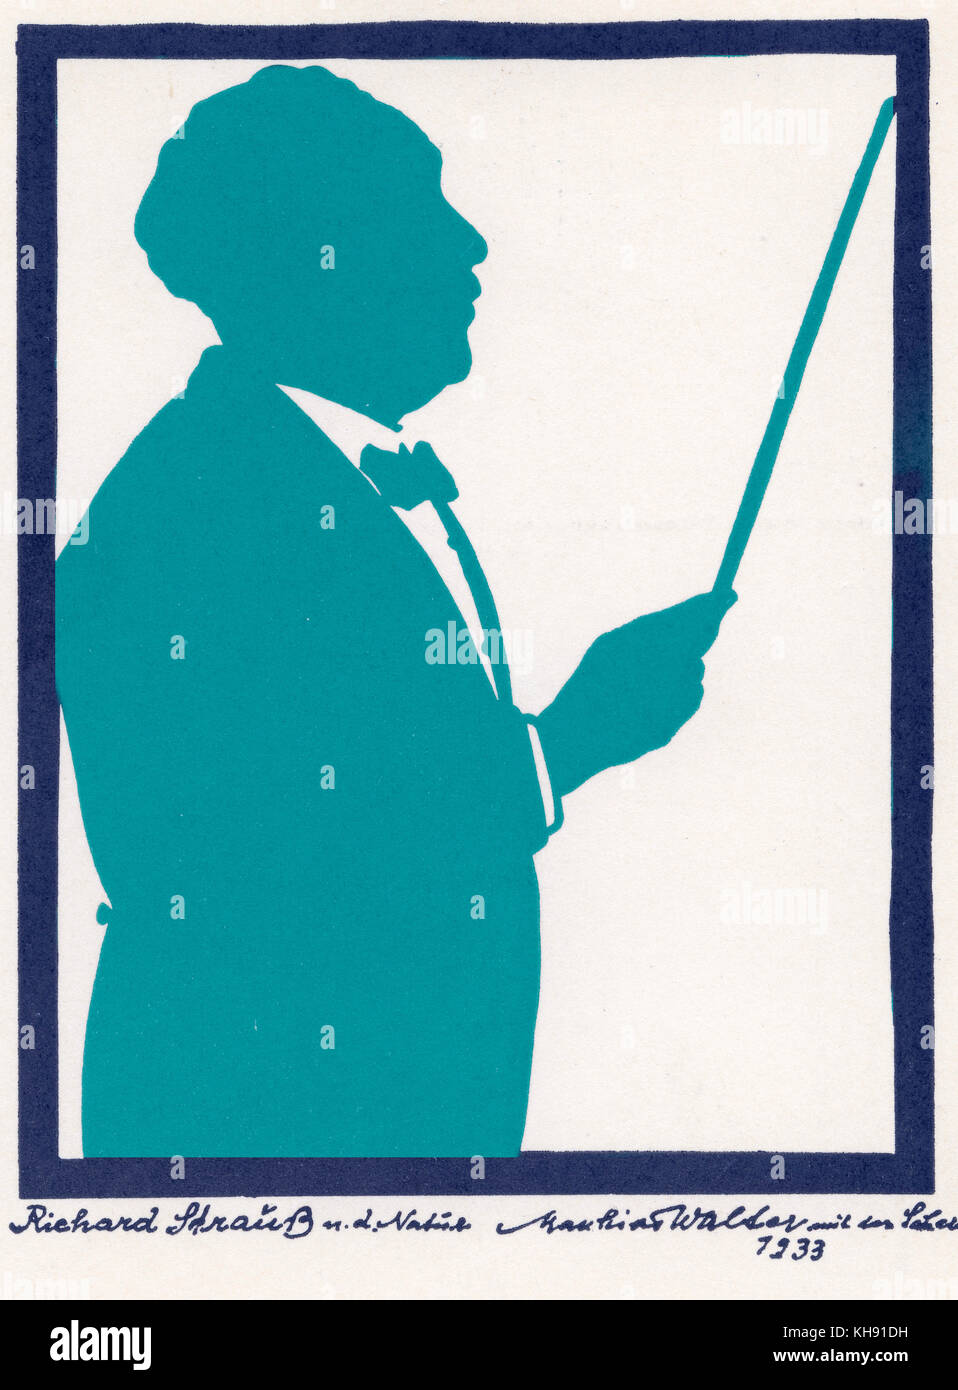 Richard Strauss - silhouette  by Matthias Walter, 1933.  German composer & conductor, 1864-1949. Stock Photo